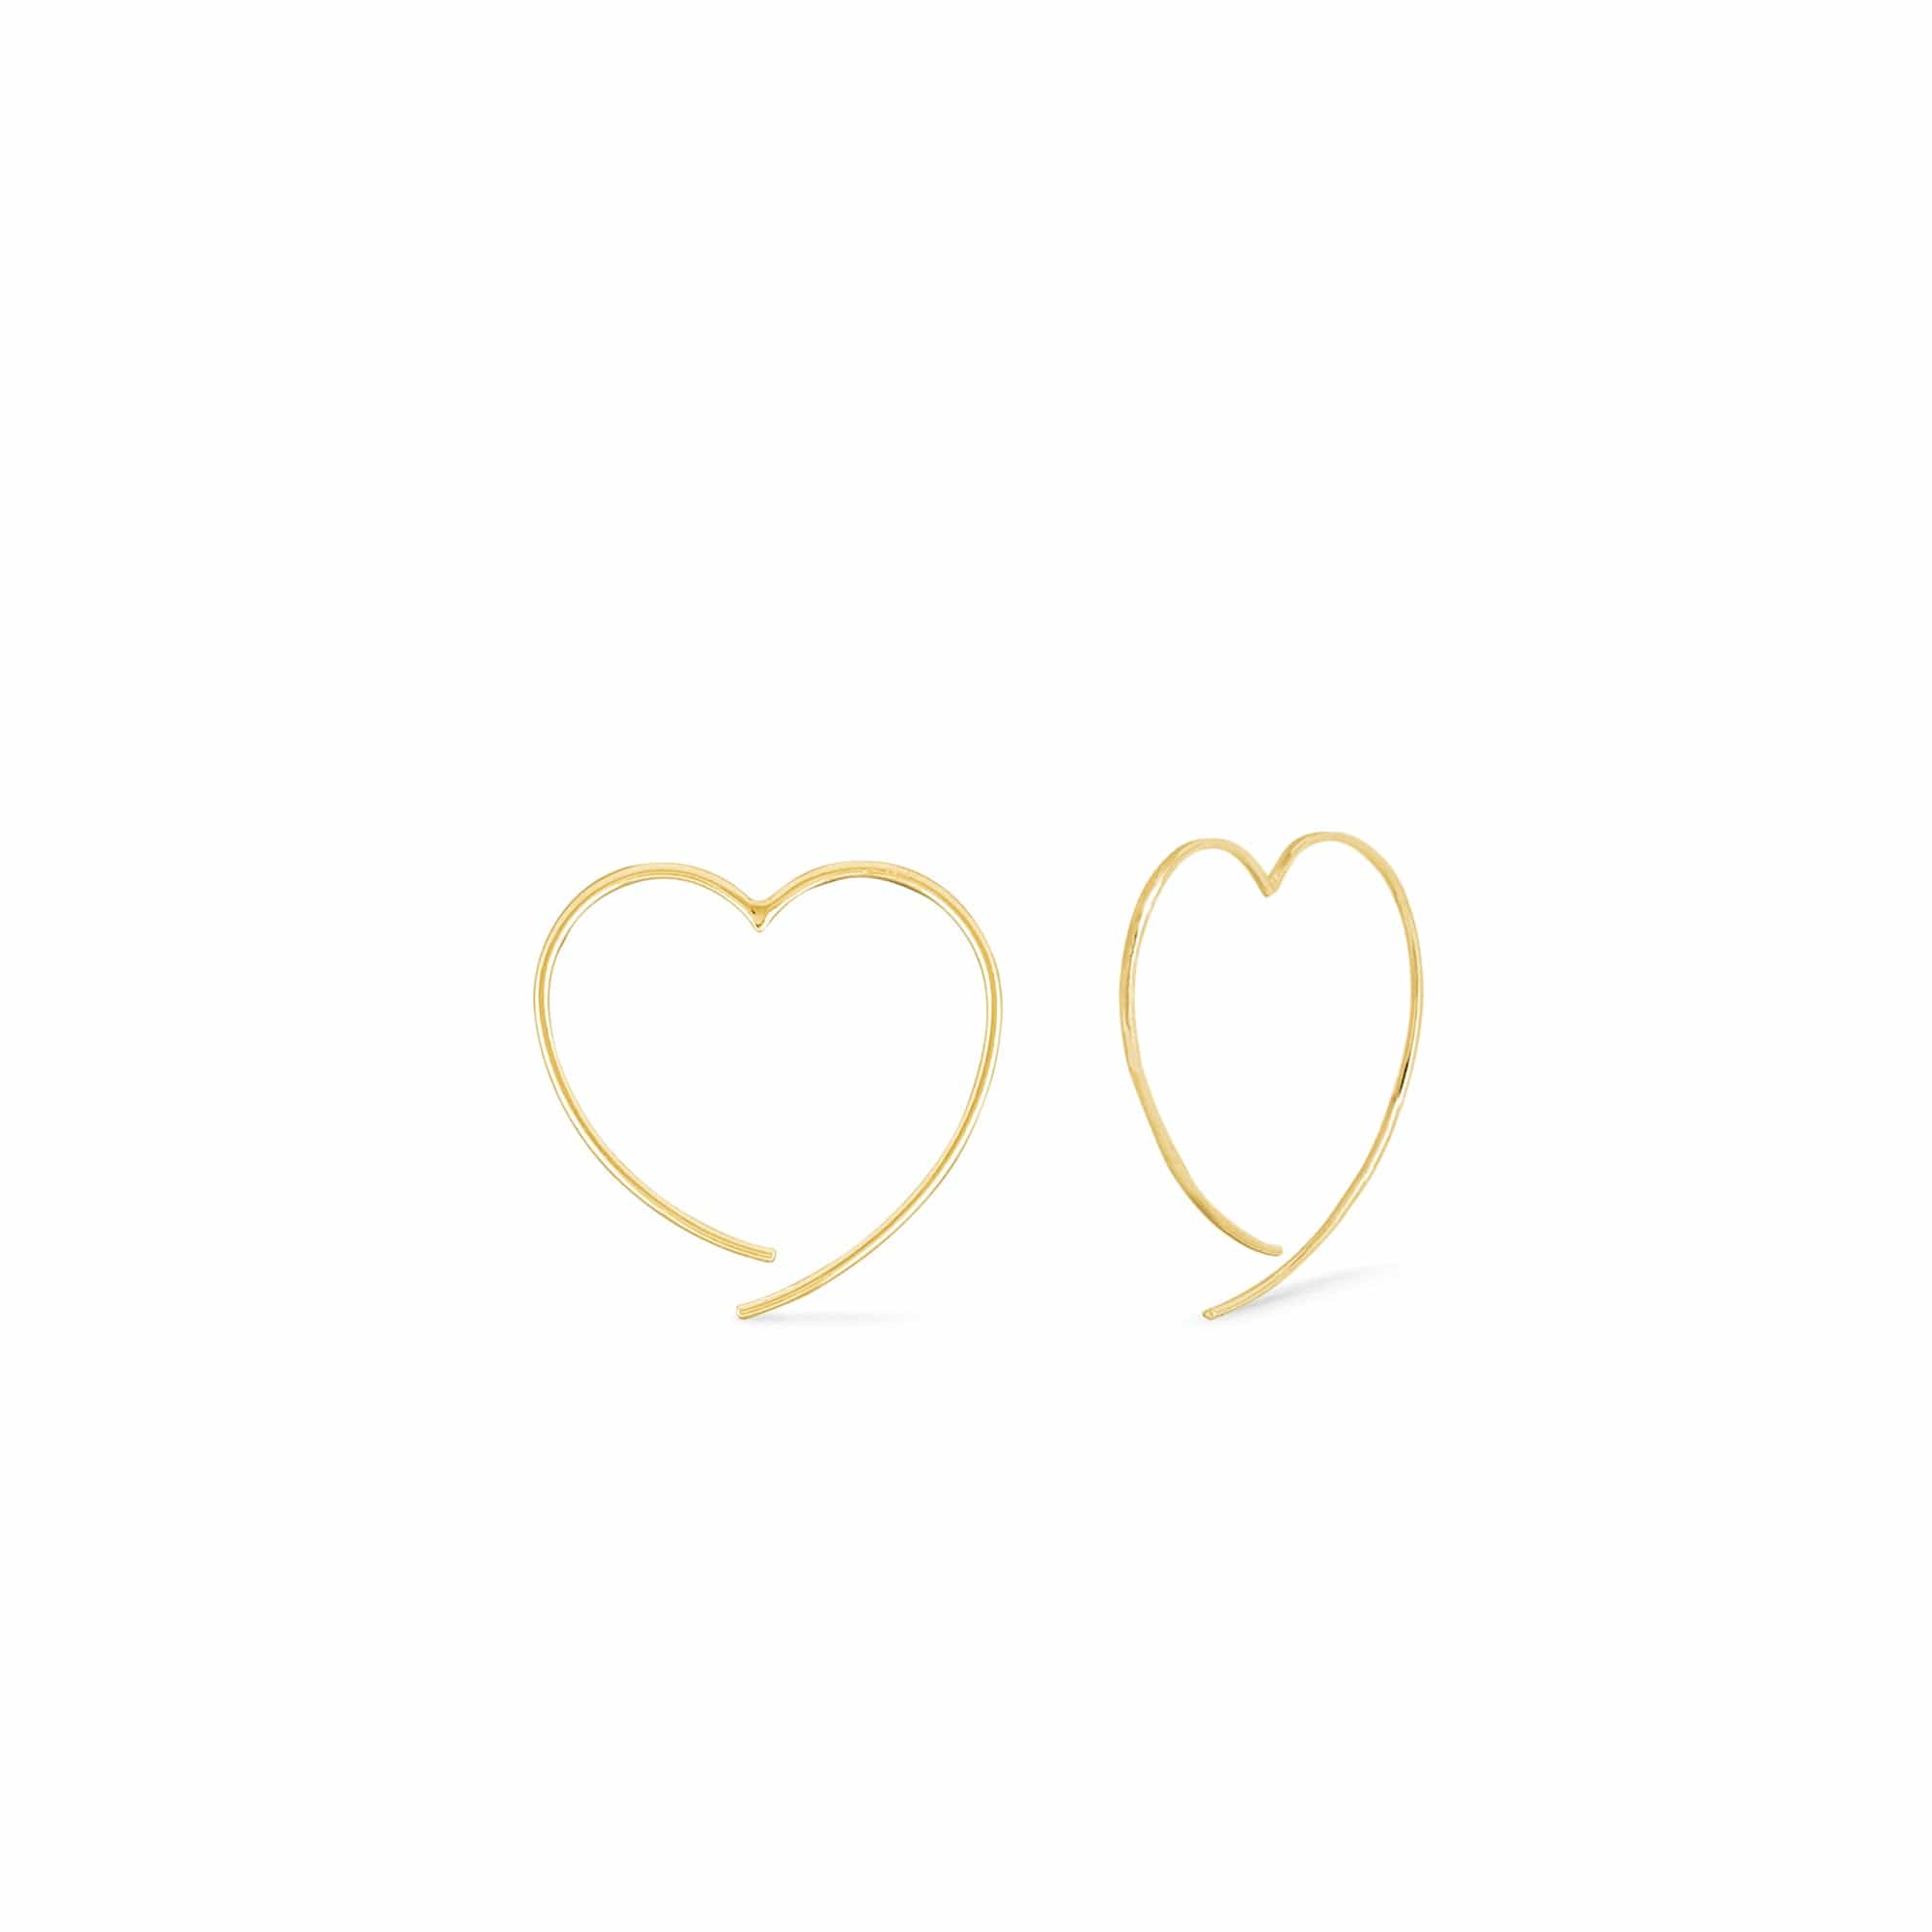 Boma Jewelry Earrings 14K Gold Plated / 0.8" Heart Pull Through Hoops